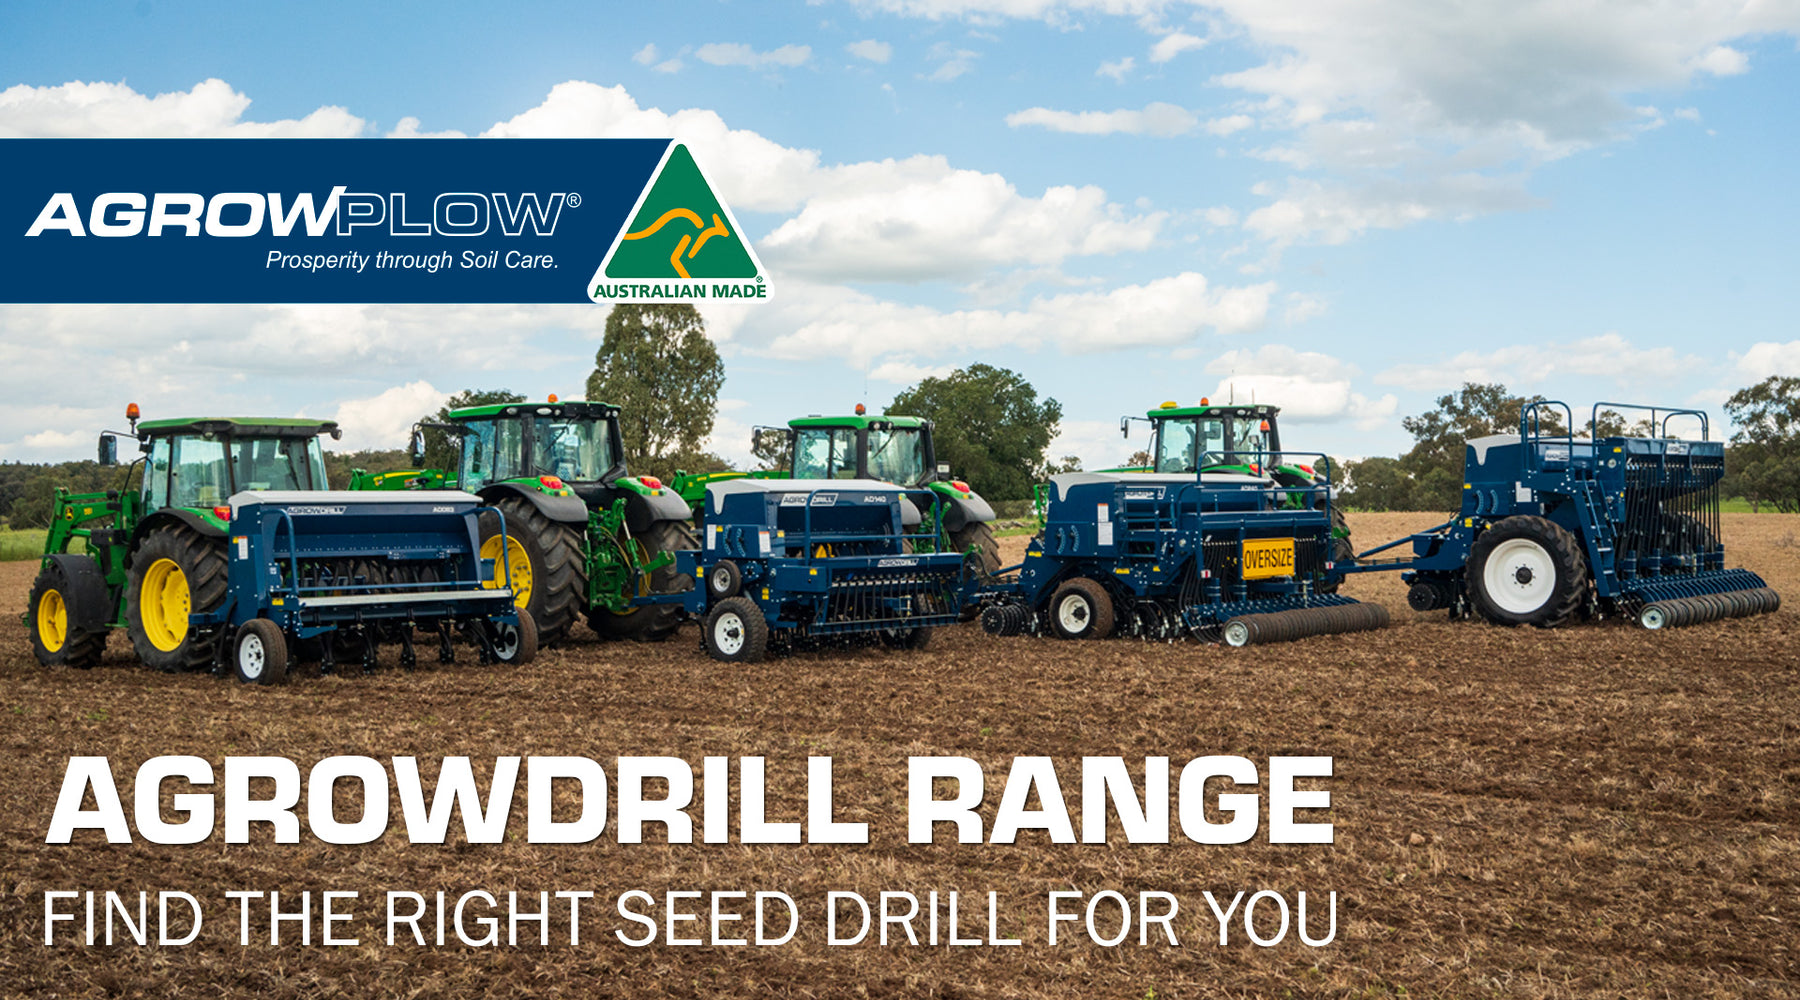 Find the right seed drill for you with the Agrowdrill Range